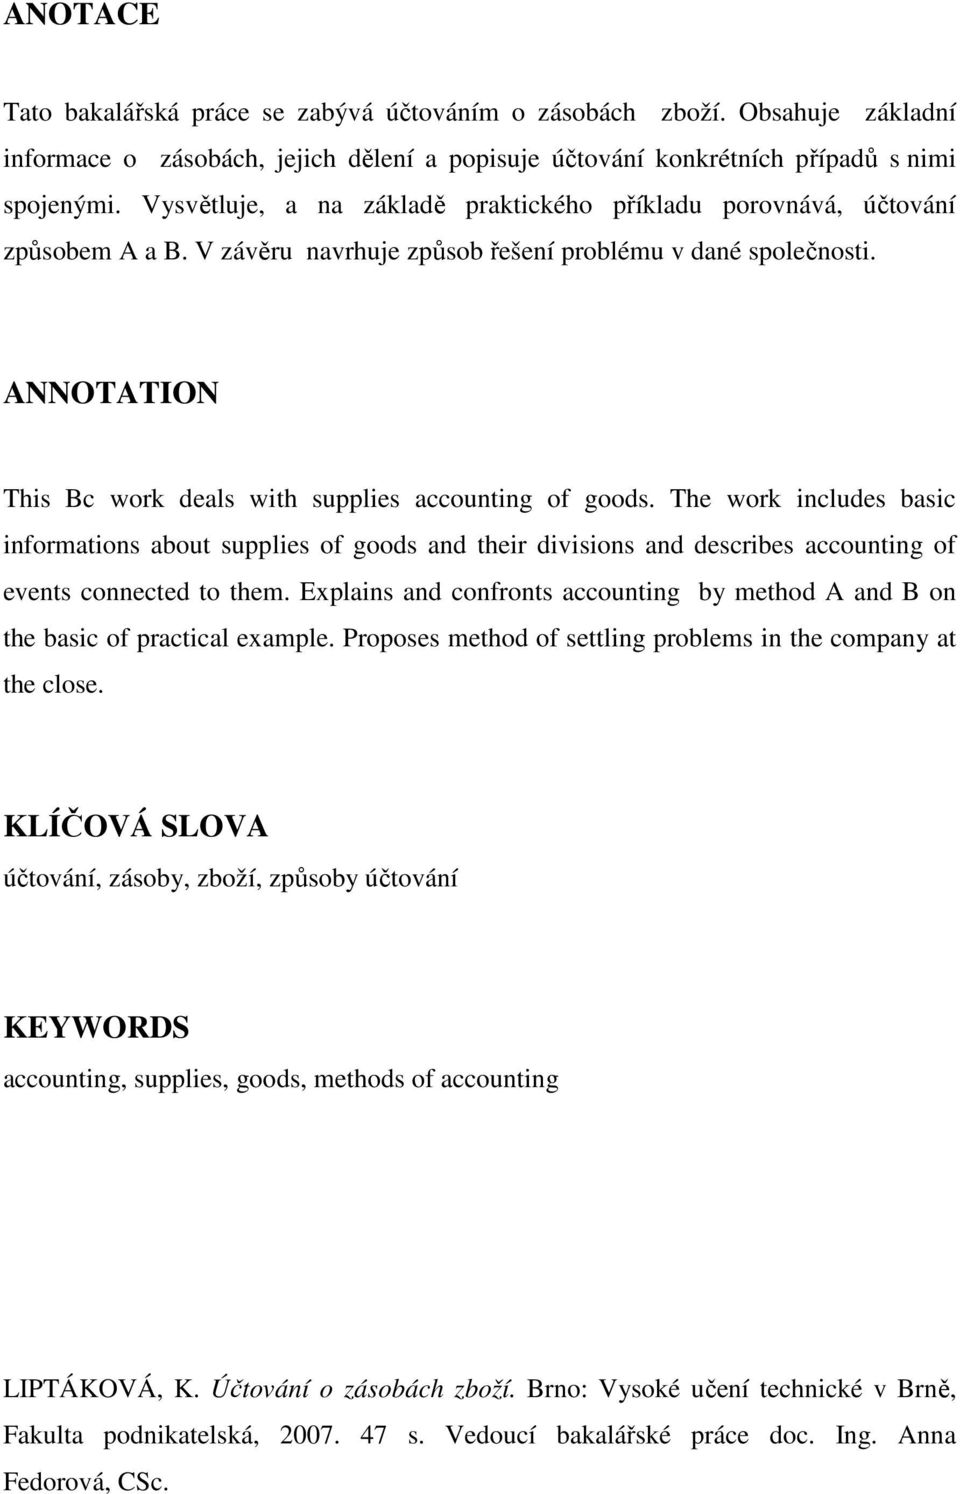 ANNOTATION This Bc work deals with supplies accounting of goods. The work includes basic informations about supplies of goods and their divisions and describes accounting of events connected to them.